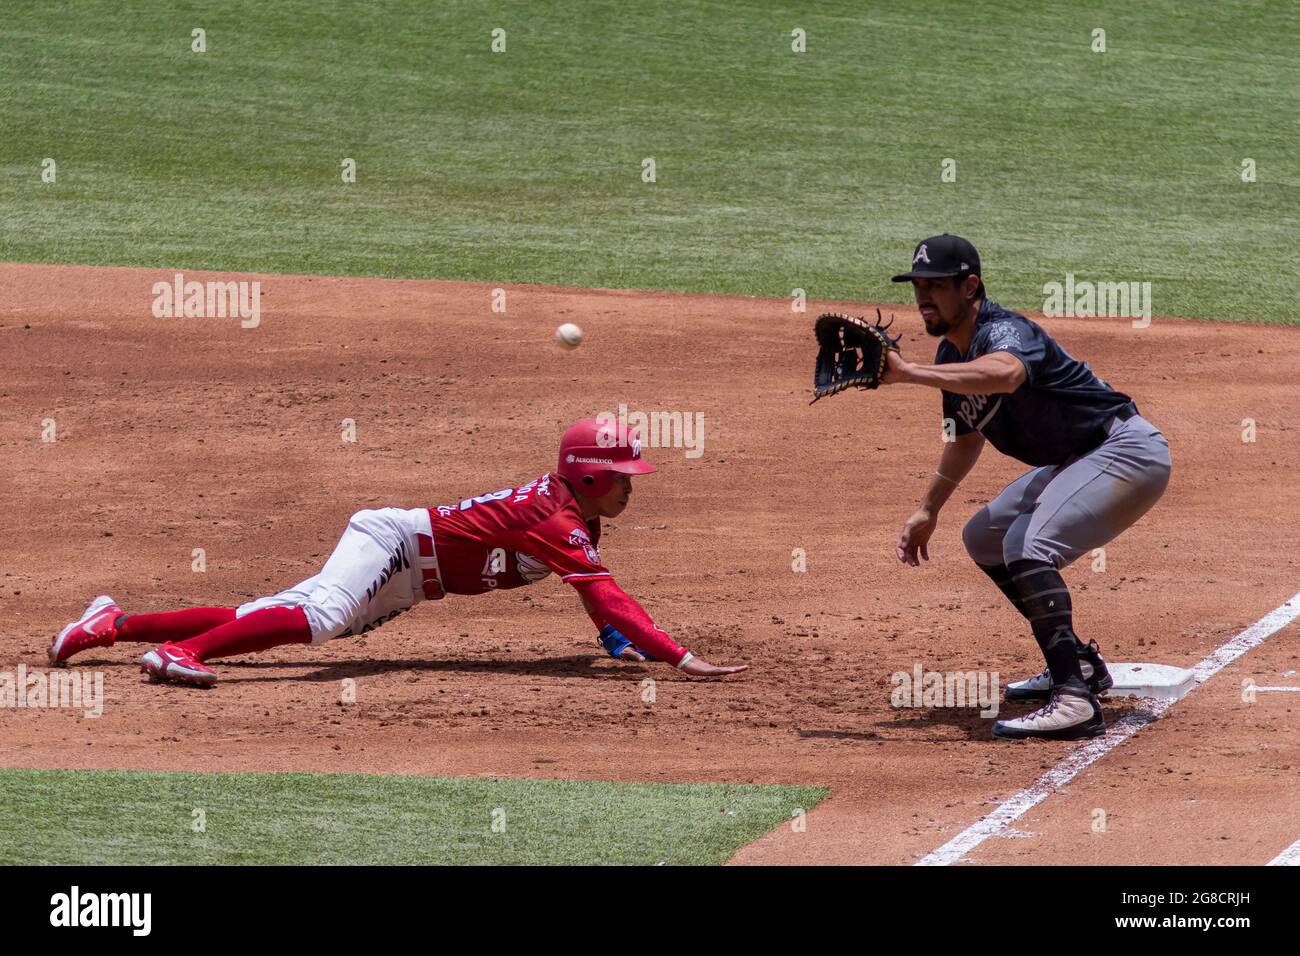 Mexico City, Mexico, July 18, 2021: Carlos Figueroa #12 of the Diablos  Rojos dives into plate of the second base ahead of the tag during the match  between Diablos Rojos and Monclova